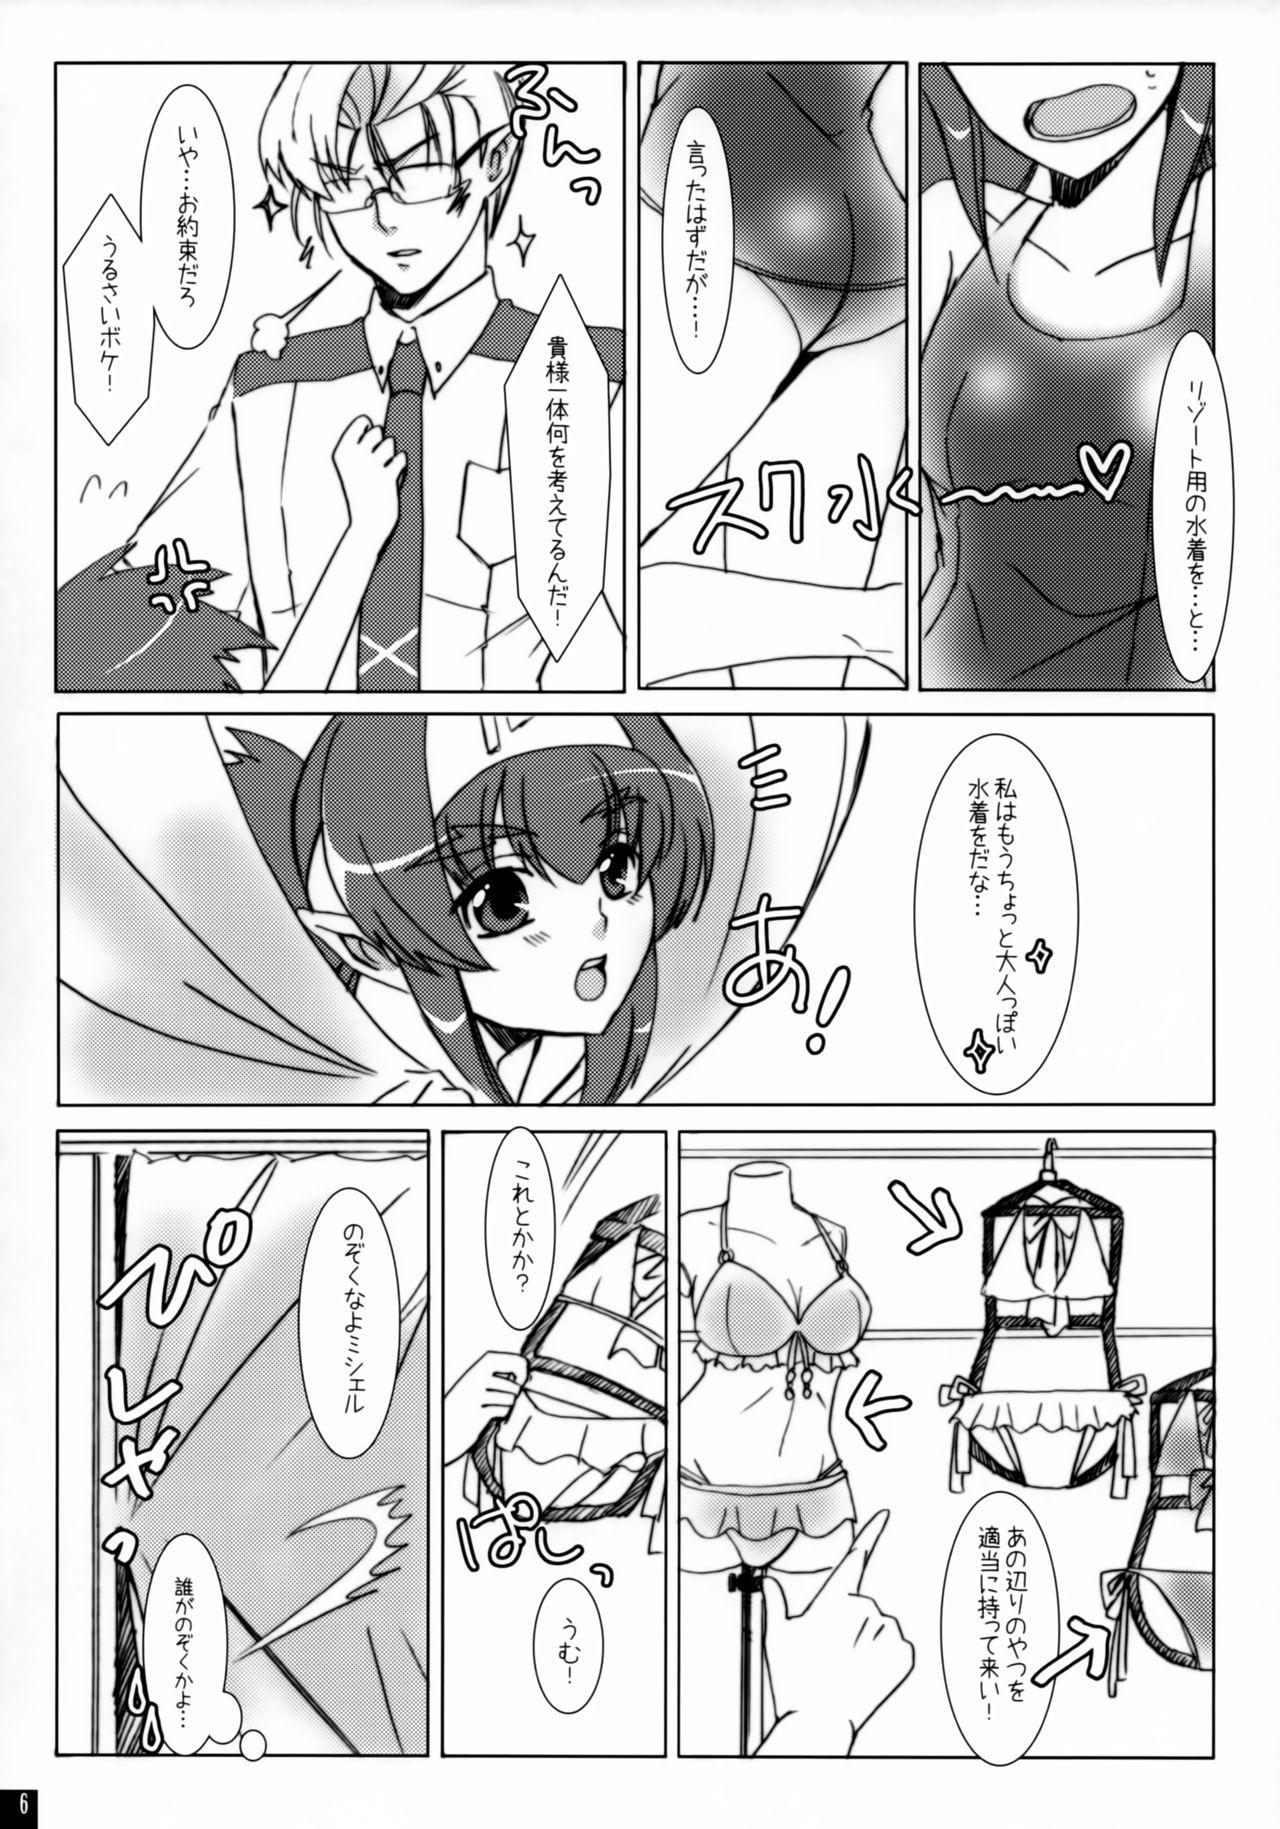 Farting Lovely Close - Macross frontier Muscular - Page 5